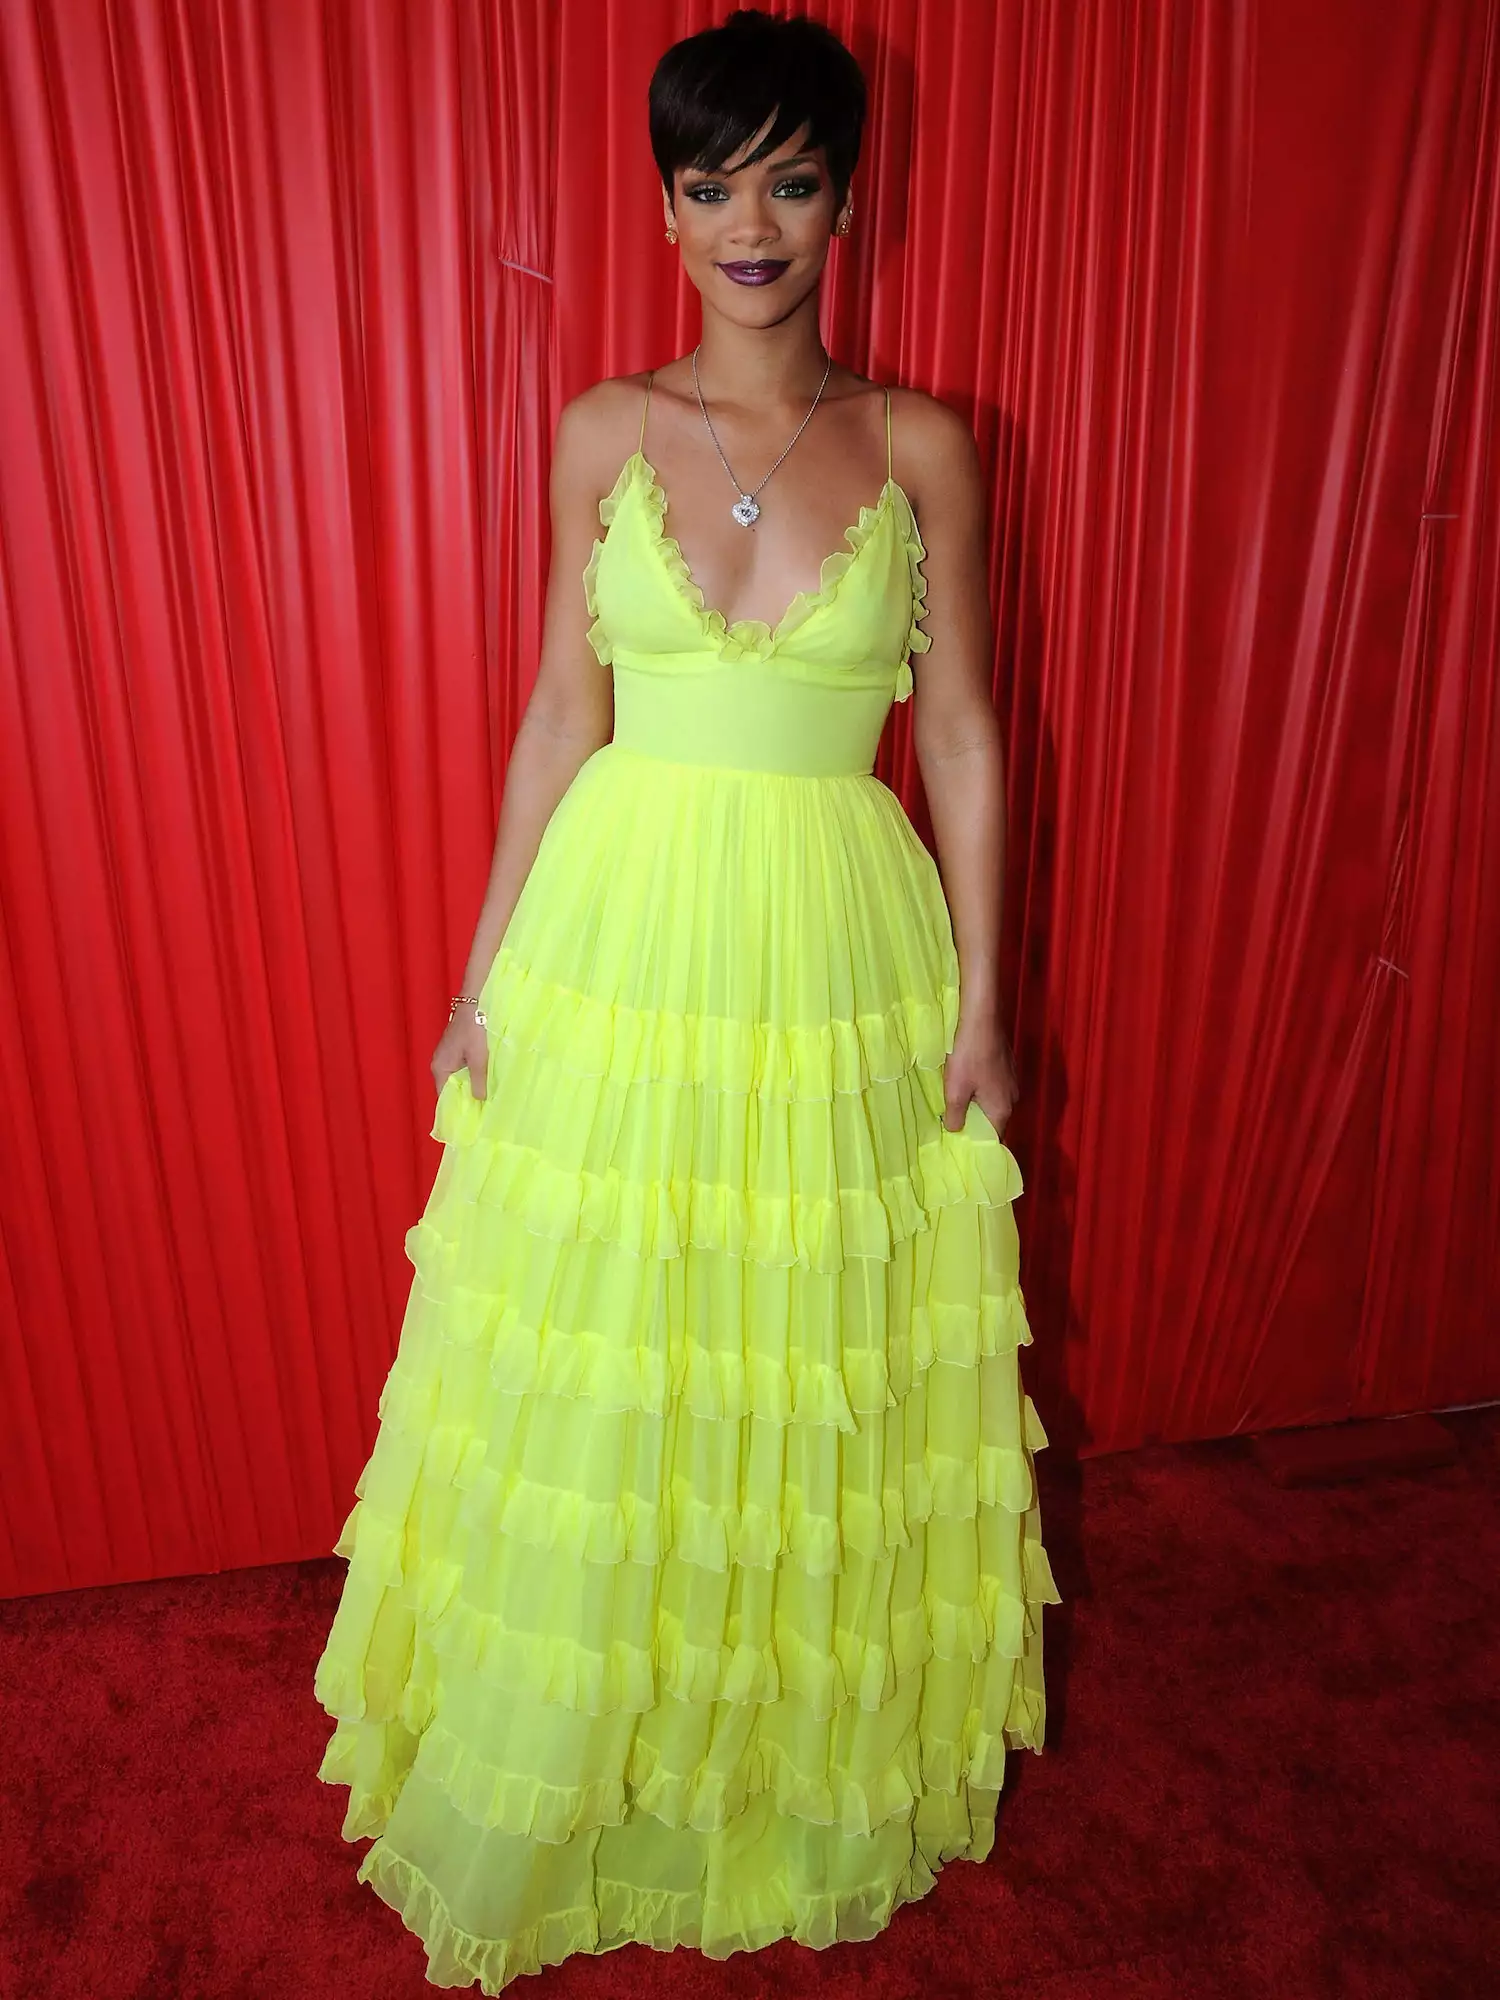 Rihanna wears a neon yellow tulle gown to the 2008 BET Awards